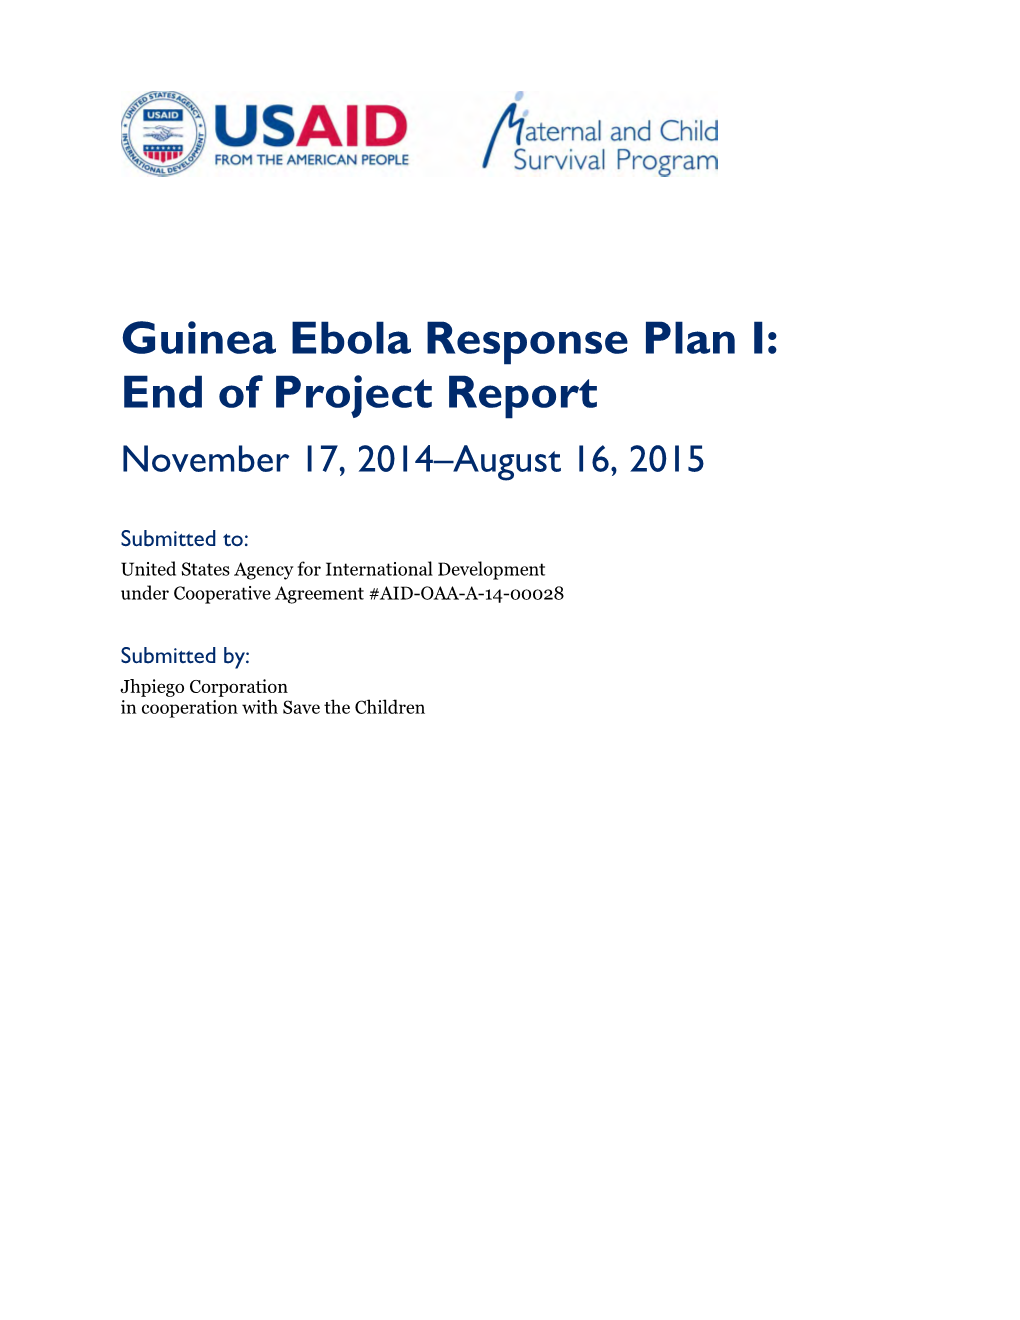 Guinea Ebola Response Plan I: End of Project Report November 17, 2014–August 16, 2015